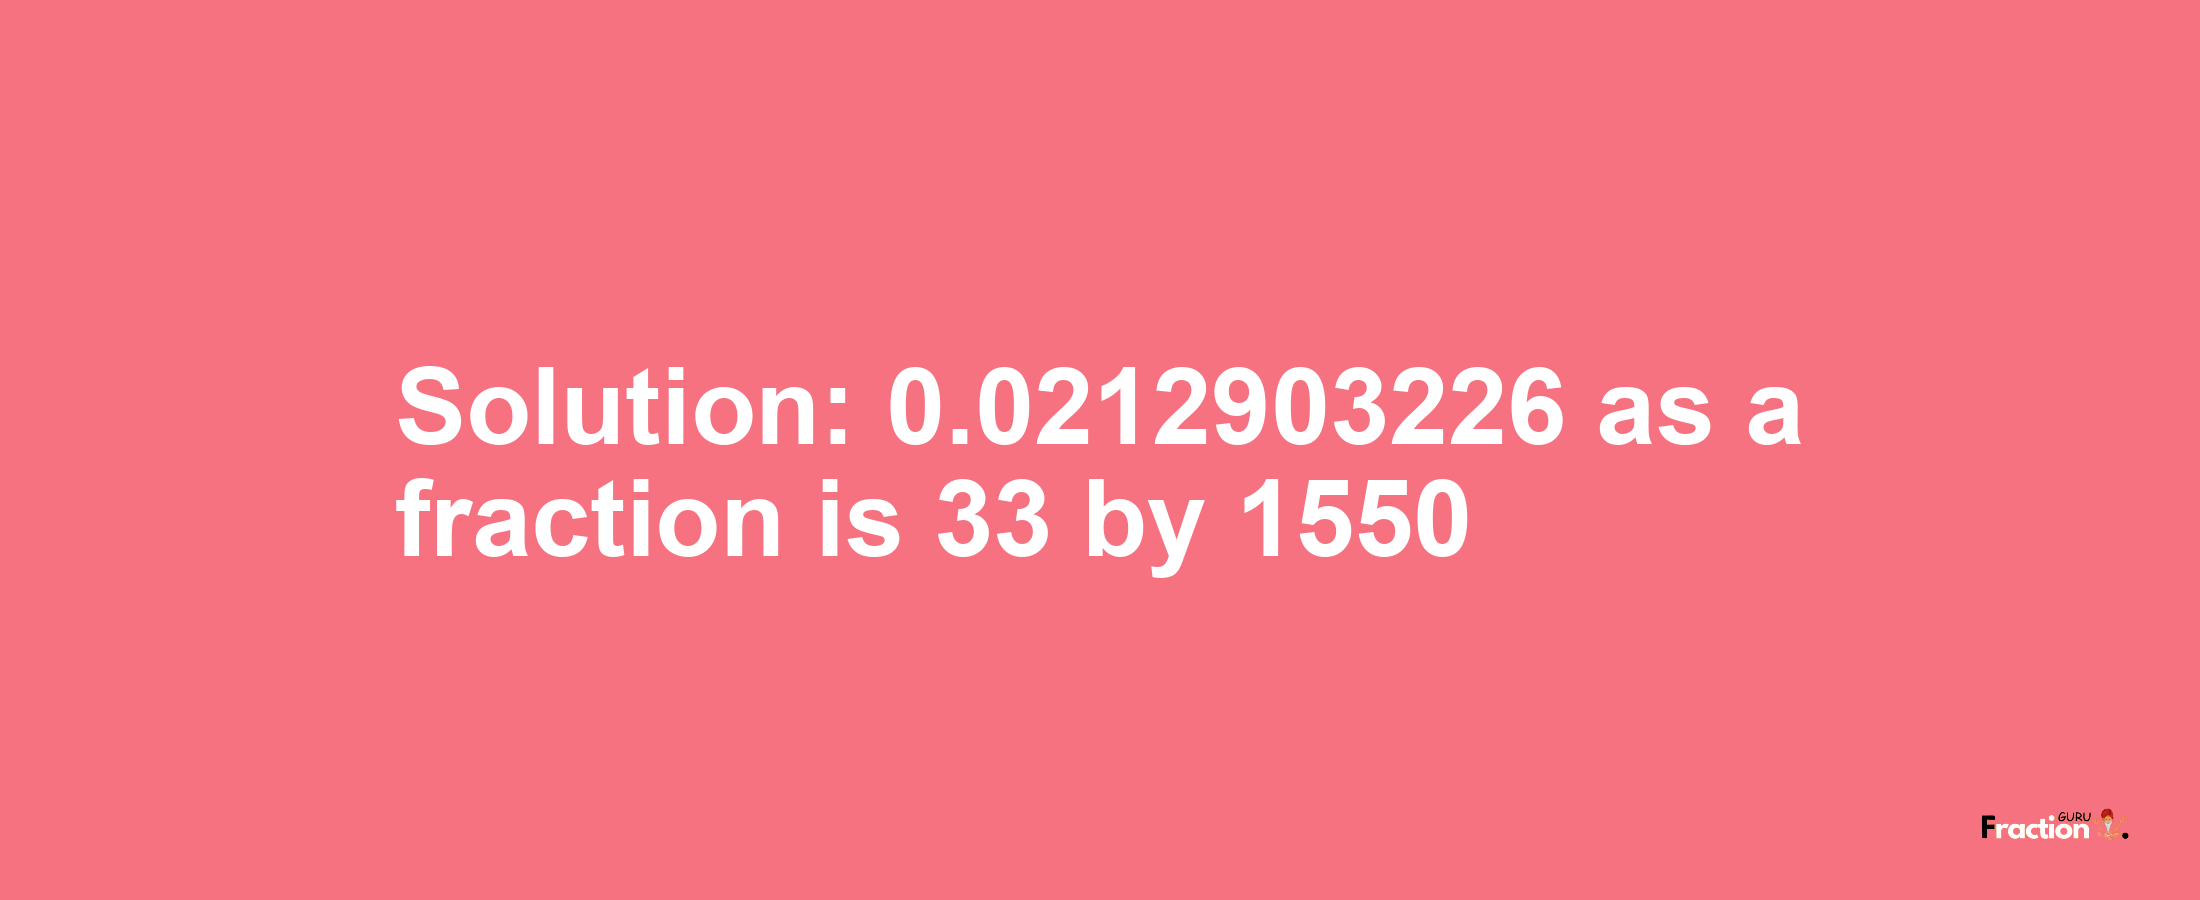 Solution:0.0212903226 as a fraction is 33/1550